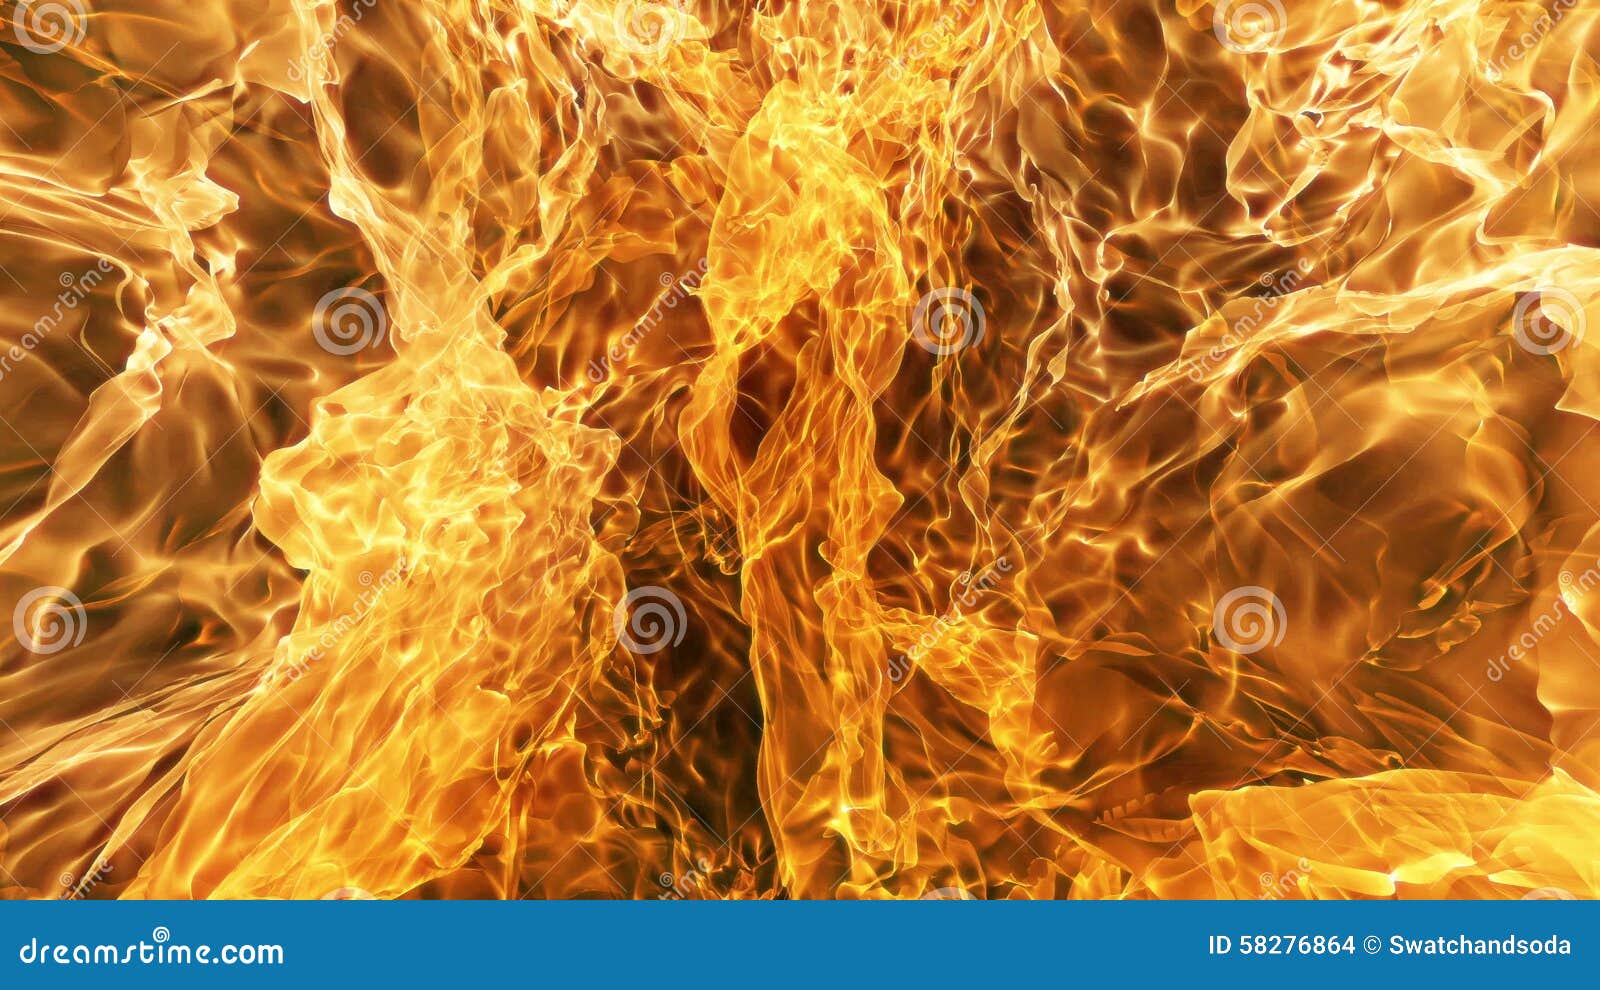 Slow Motion Fire Loop Background Stock Footage & Videos - 282 Stock Videos